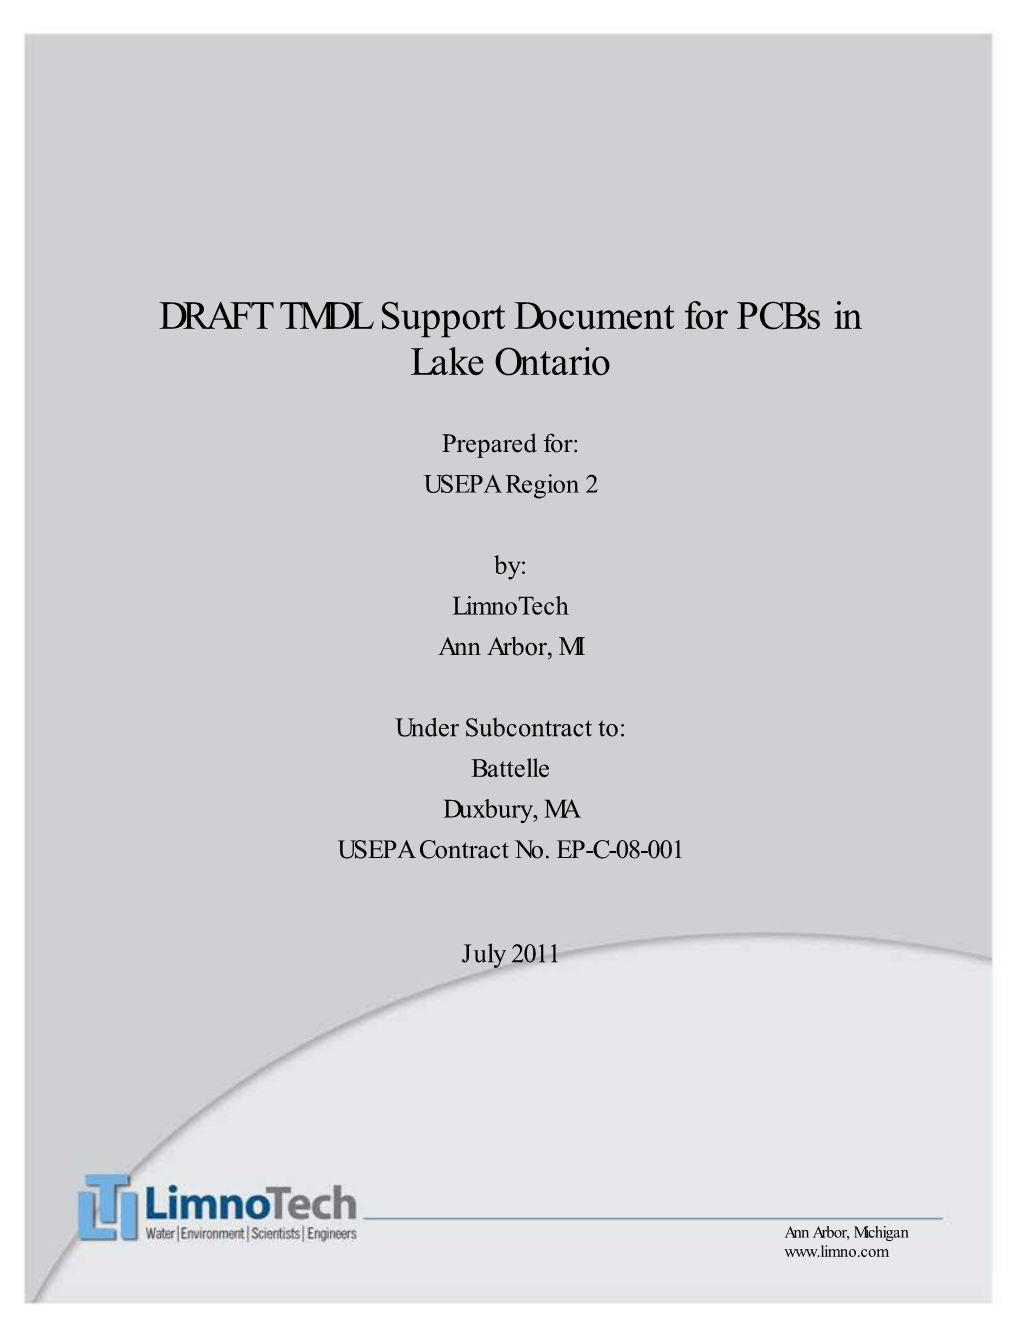 DRAFT TMDL Support Document for Pcbs in Lake Ontario